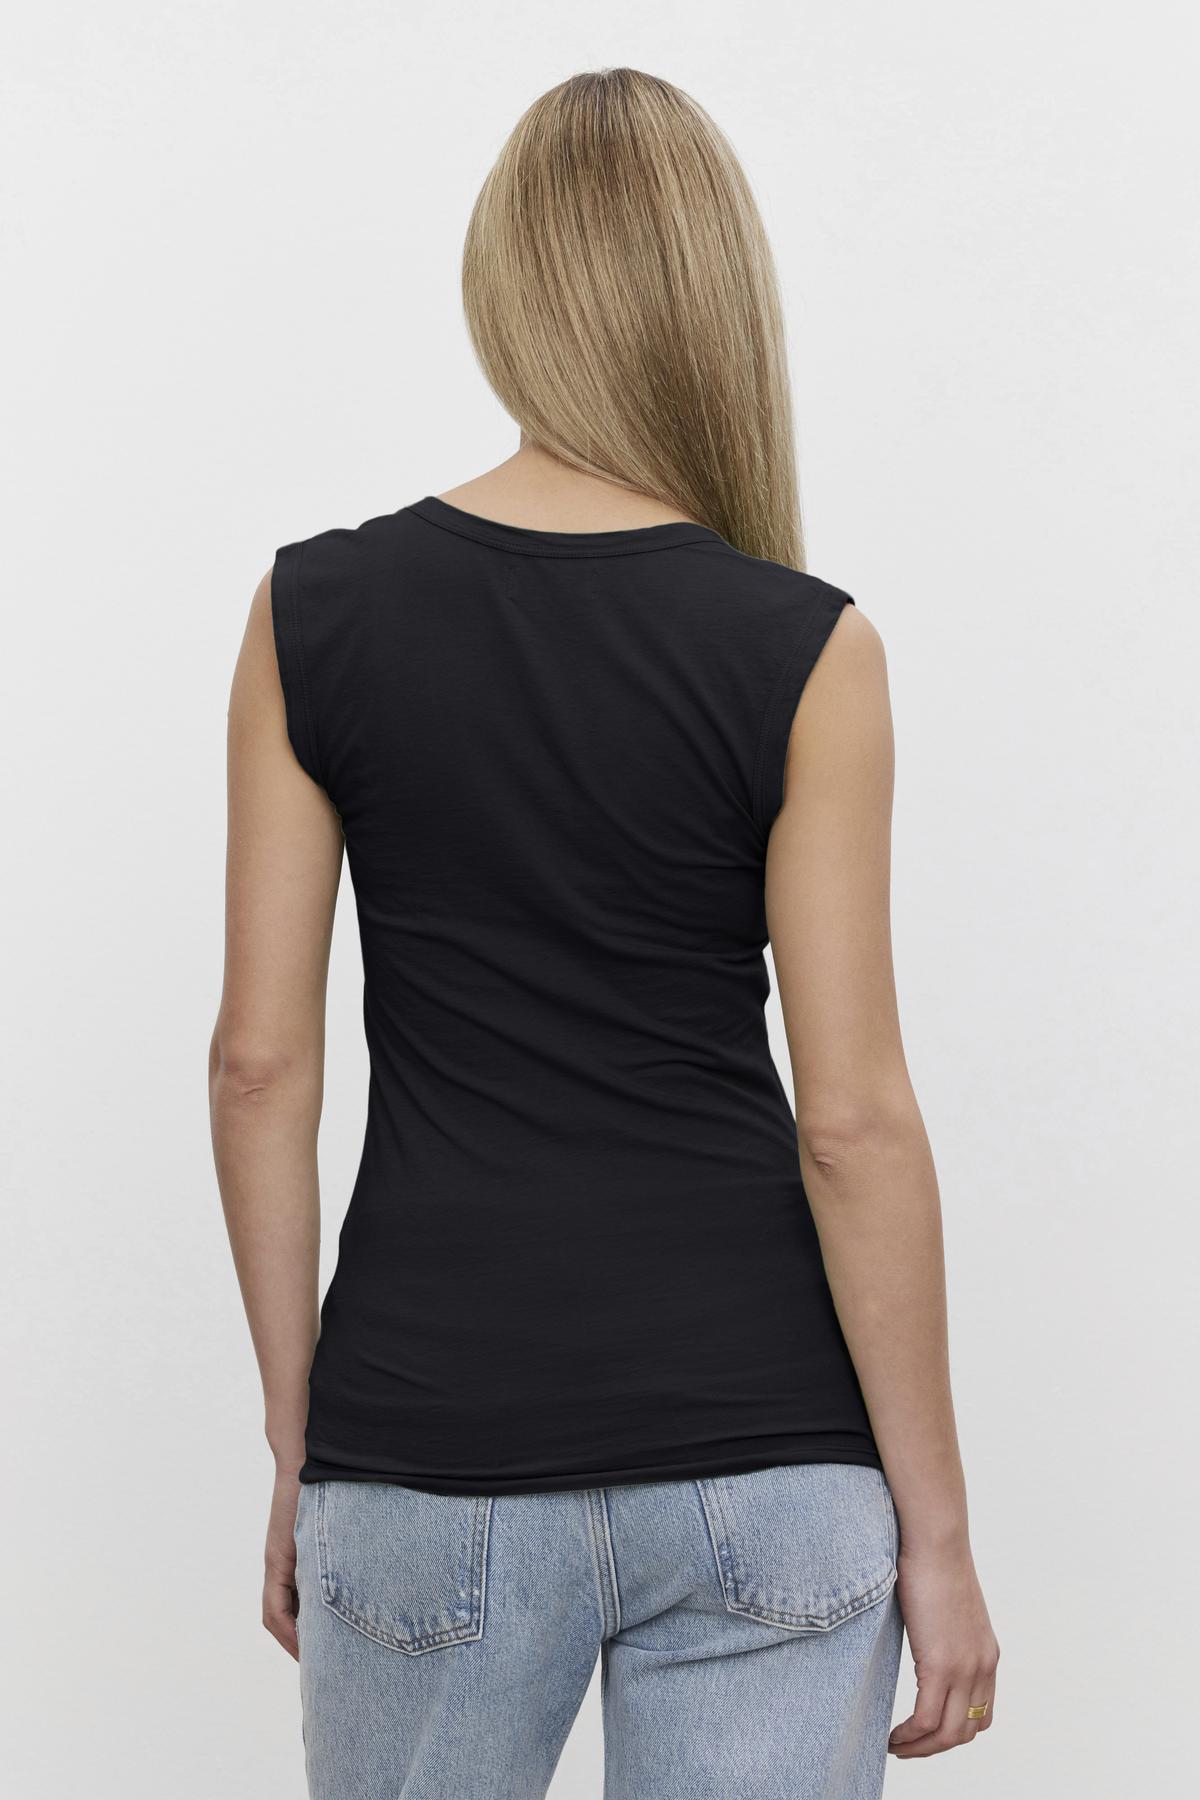   A person with long, straight hair is shown from the back, wearing a black ESTINA TANK TOP by Velvet by Graham & Spencer and light blue jeans against a plain white background. 